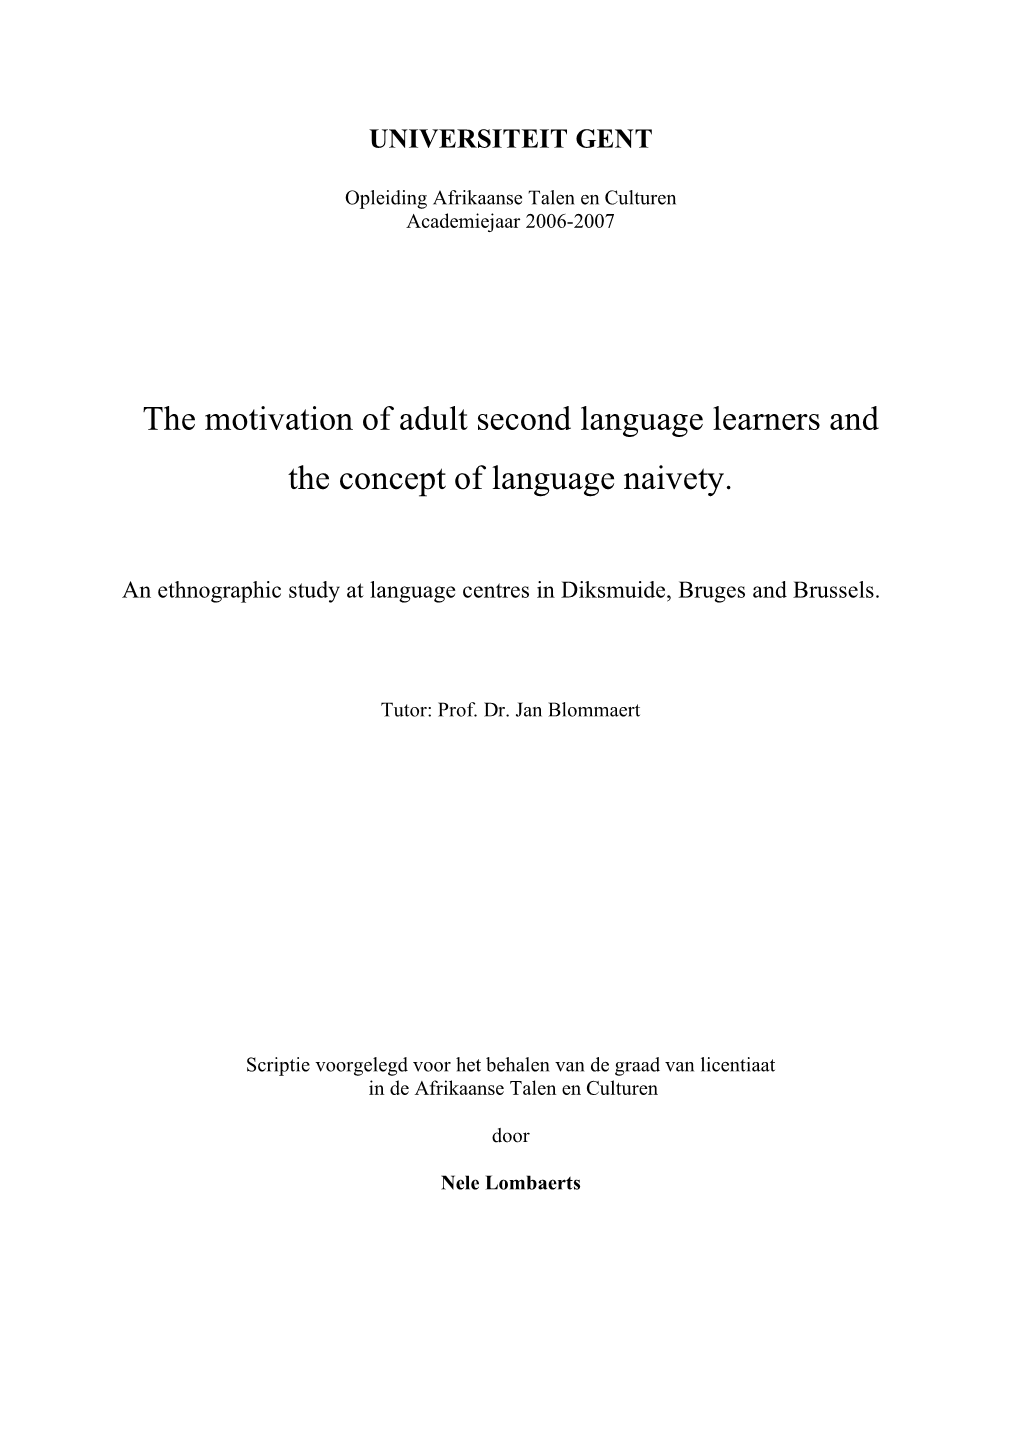 The Motivation of Adult Second Language Learners and the Concept of Language Naivety